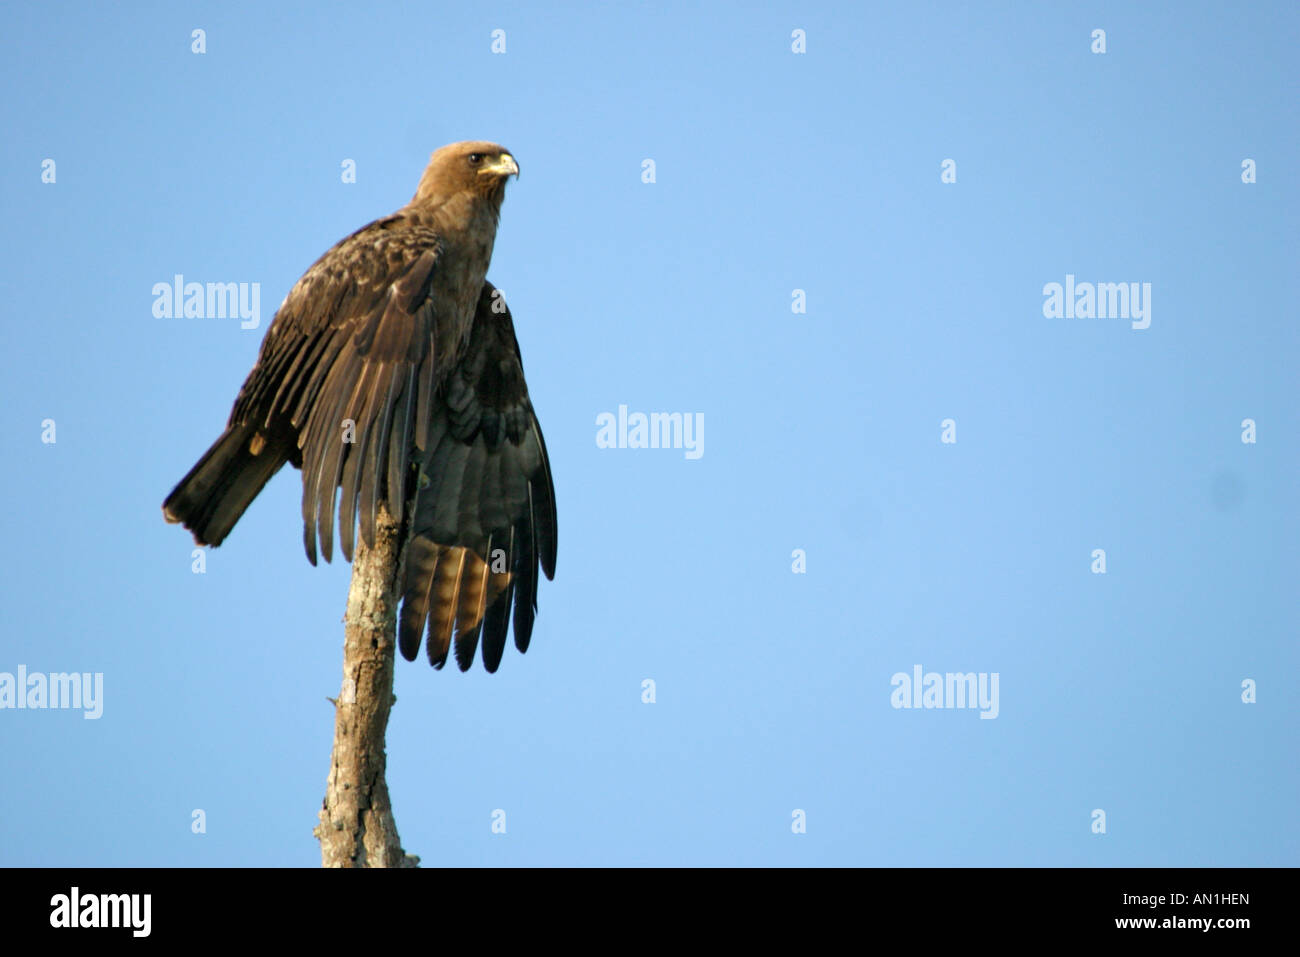 Portrait of a Wahlberg's eagle perched on a tree with its wings outspread Stock Photo